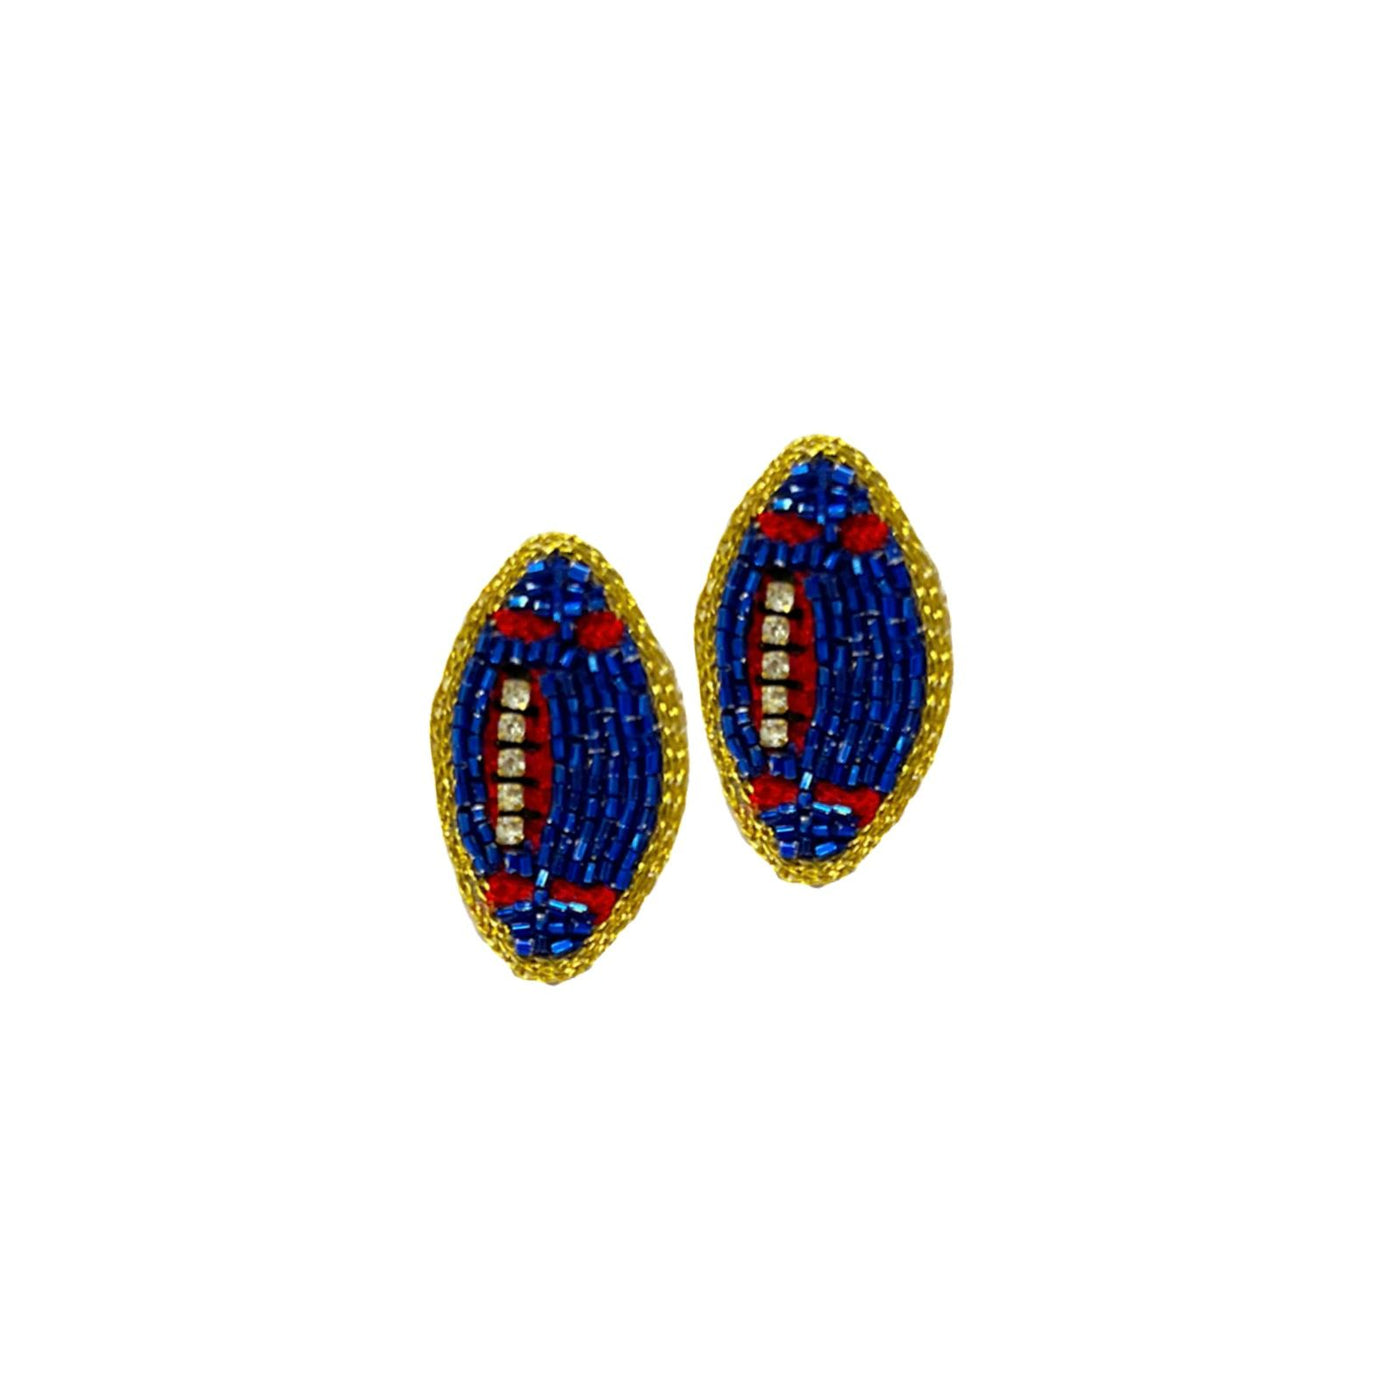 Football Stud Earrings - Blue and Red